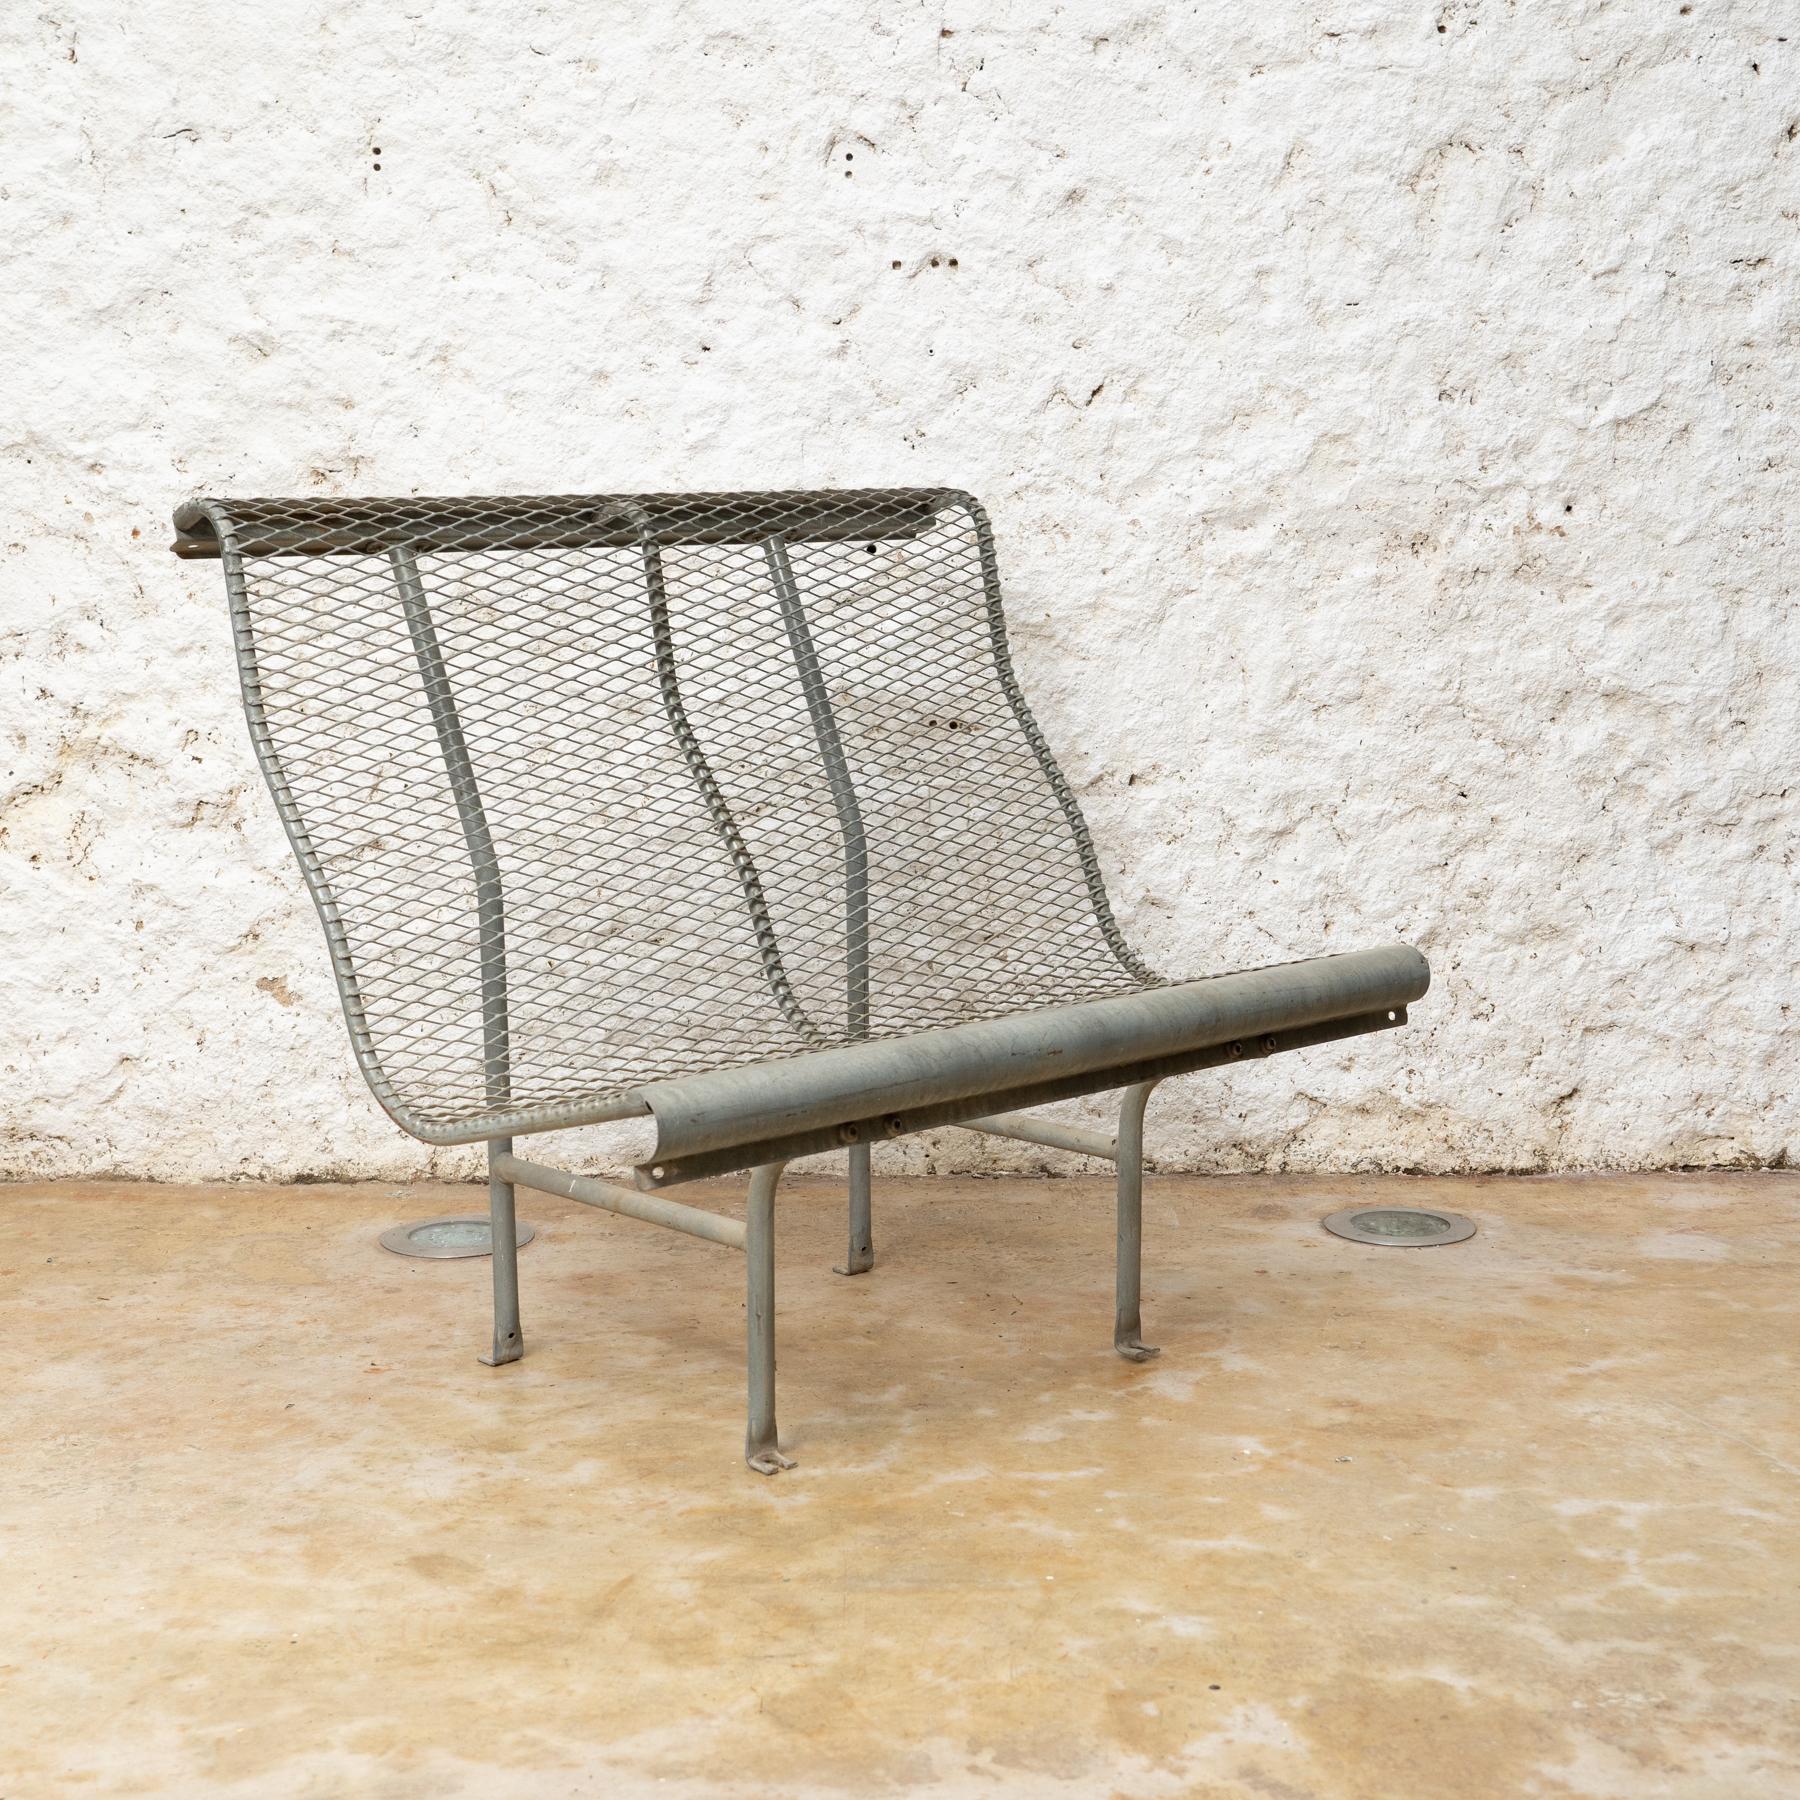 Mid-Century Modern Metal Bench Version “Perforano” by Oscar Tusquets for BD Barcelona, circa 1980 For Sale